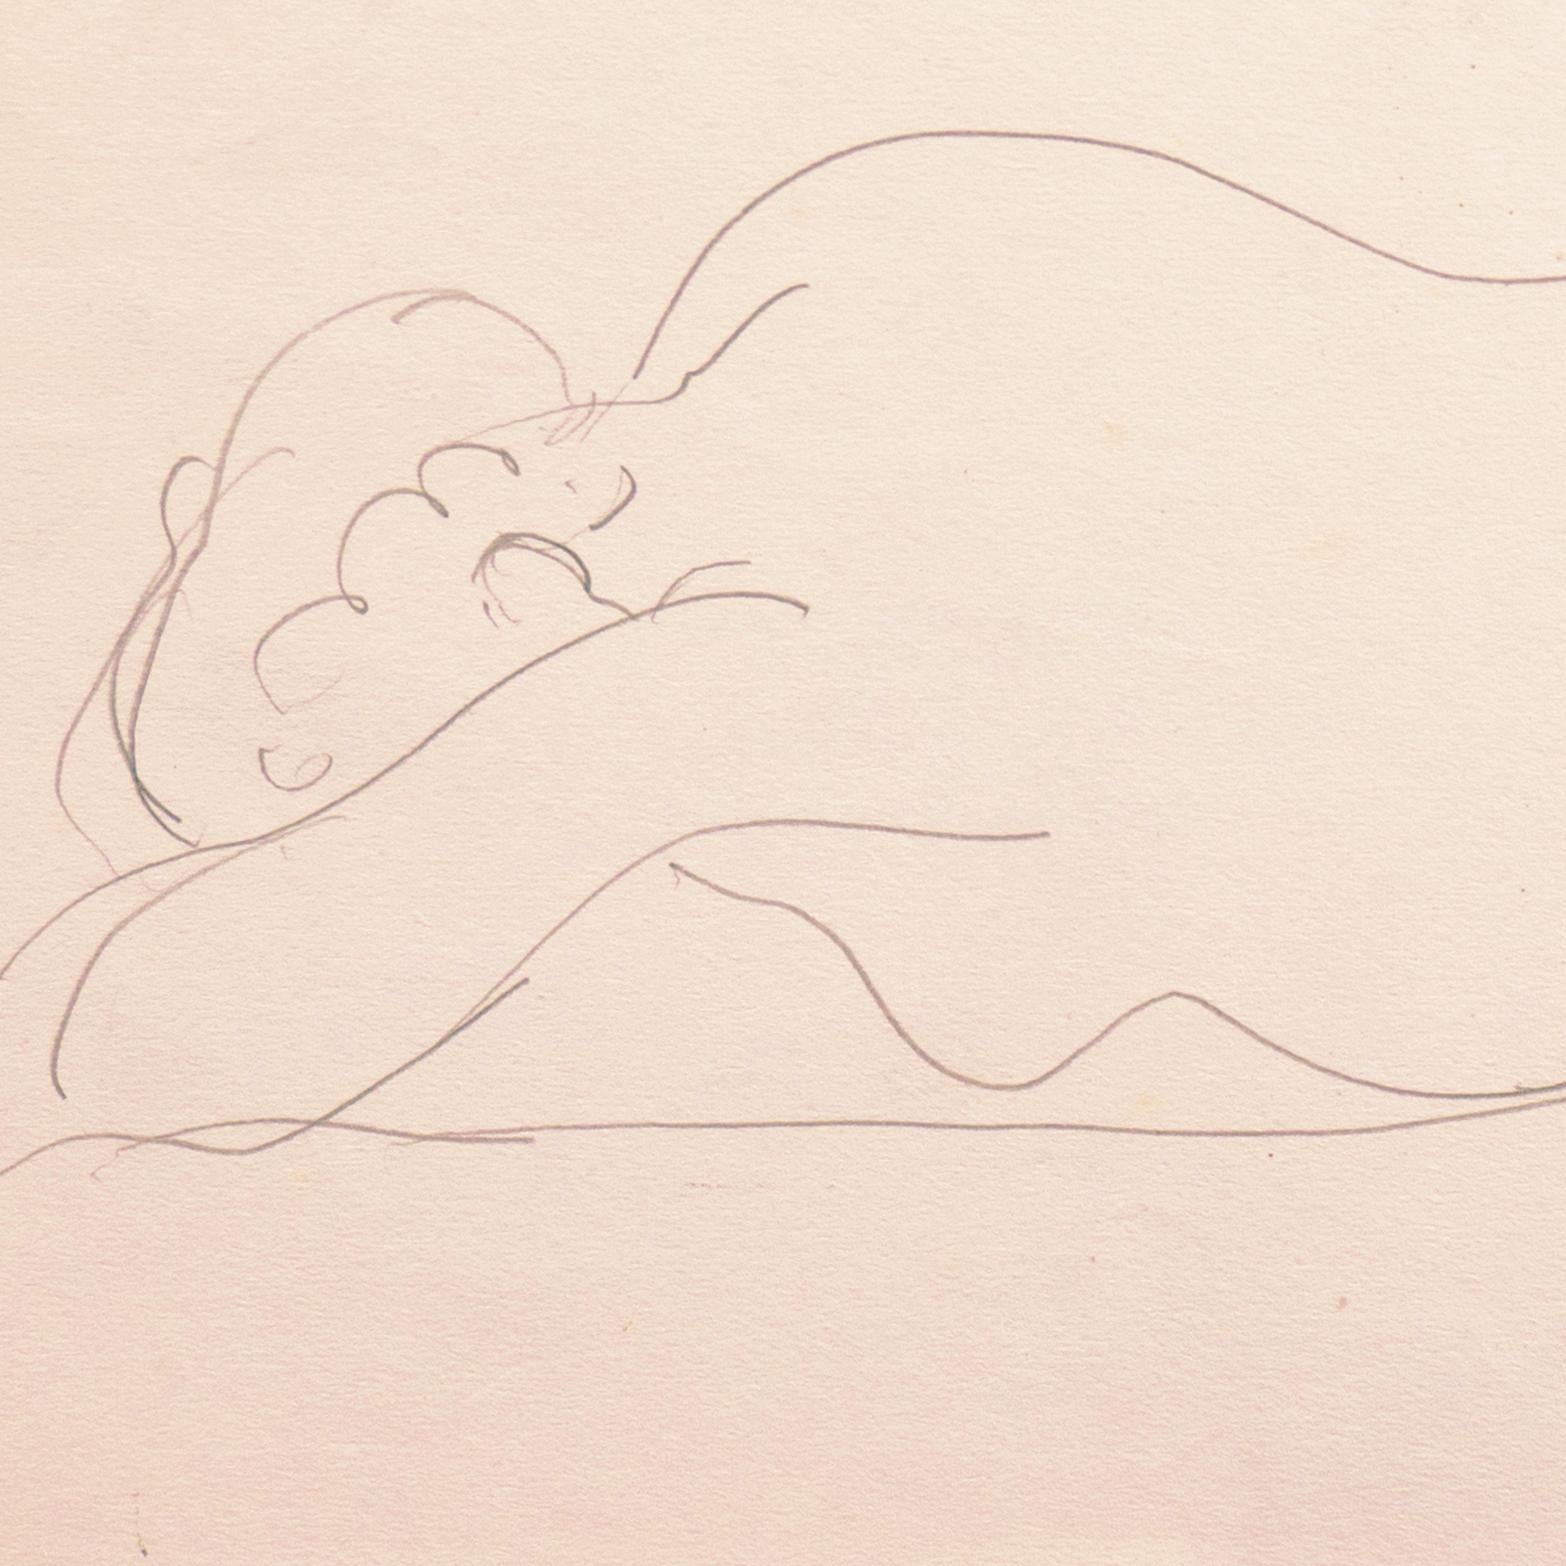 Stamped, verso, with estate stamp for Victor Di Gesu (American, 1914-1988) and created circa 1950.

A figural line drawing of a woman reclining on her side and with her back to the viewer. A loose and expressive work by this avant-garde California